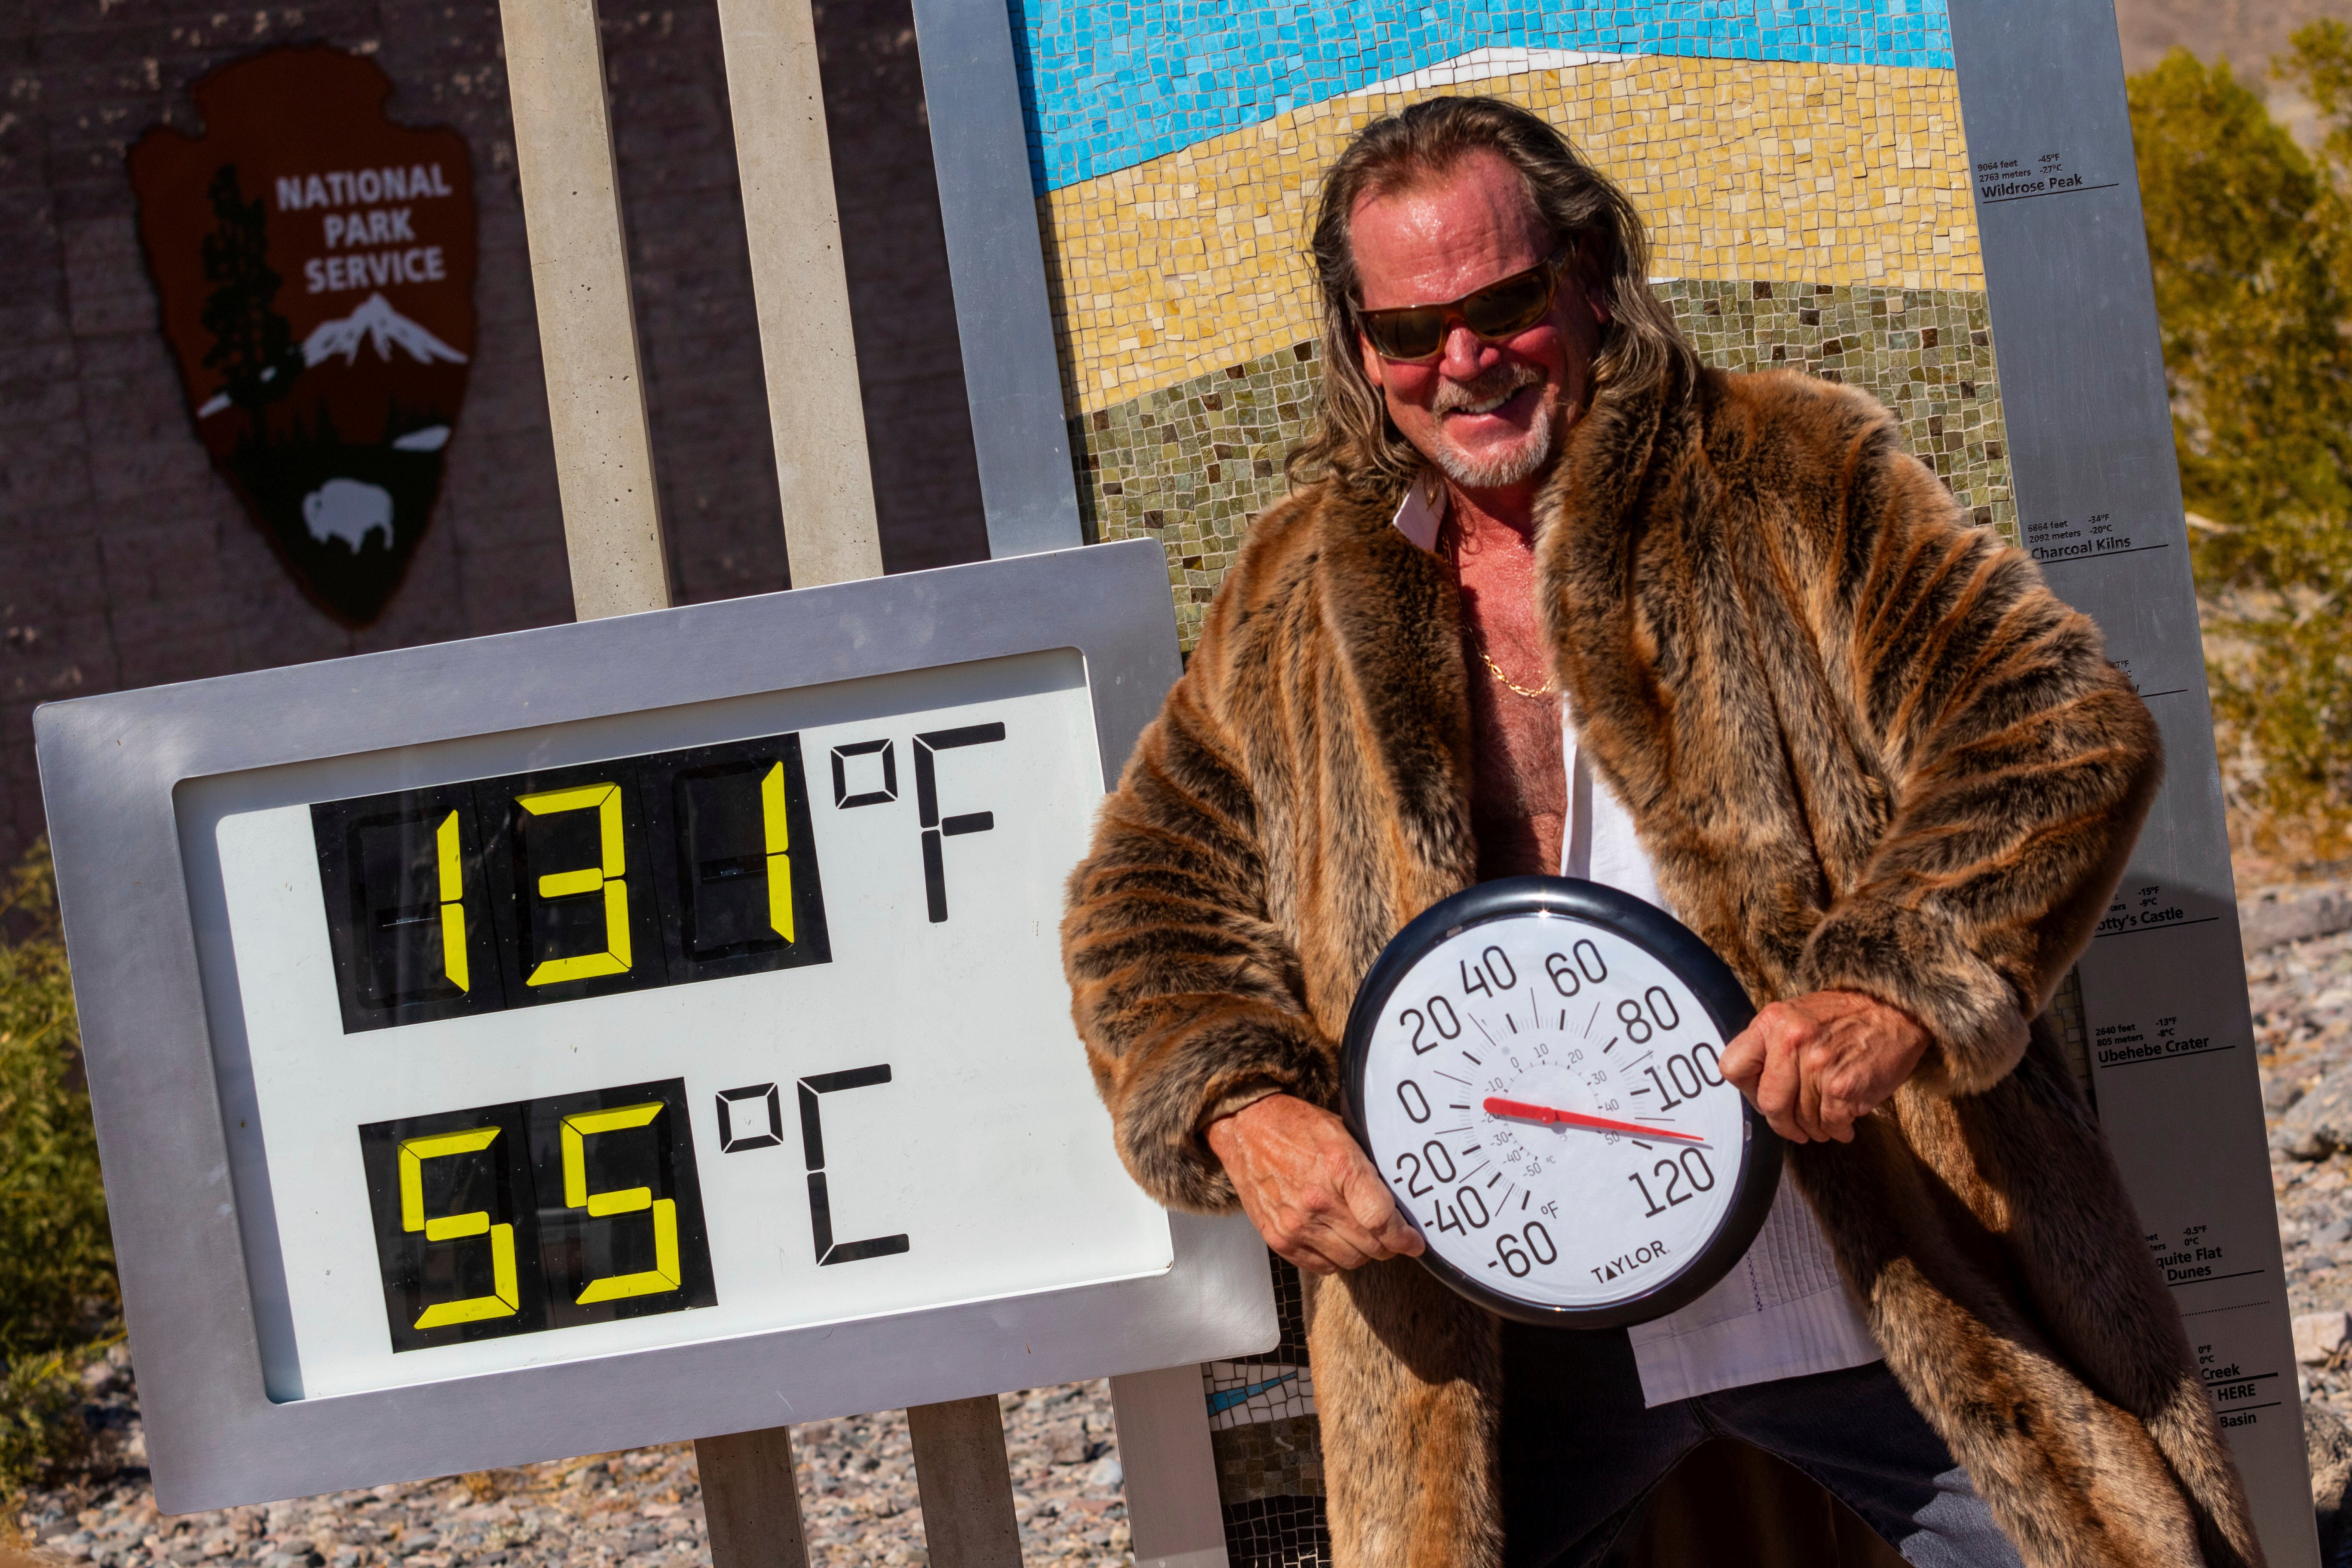 Thor Teigen poses in a fur jacket next to a thermometer displaying a temperature of 131 degrees Fahrenheit / 55 degrees Celsius at the Furnace Creek Visitors Center, in Death Valley National Park